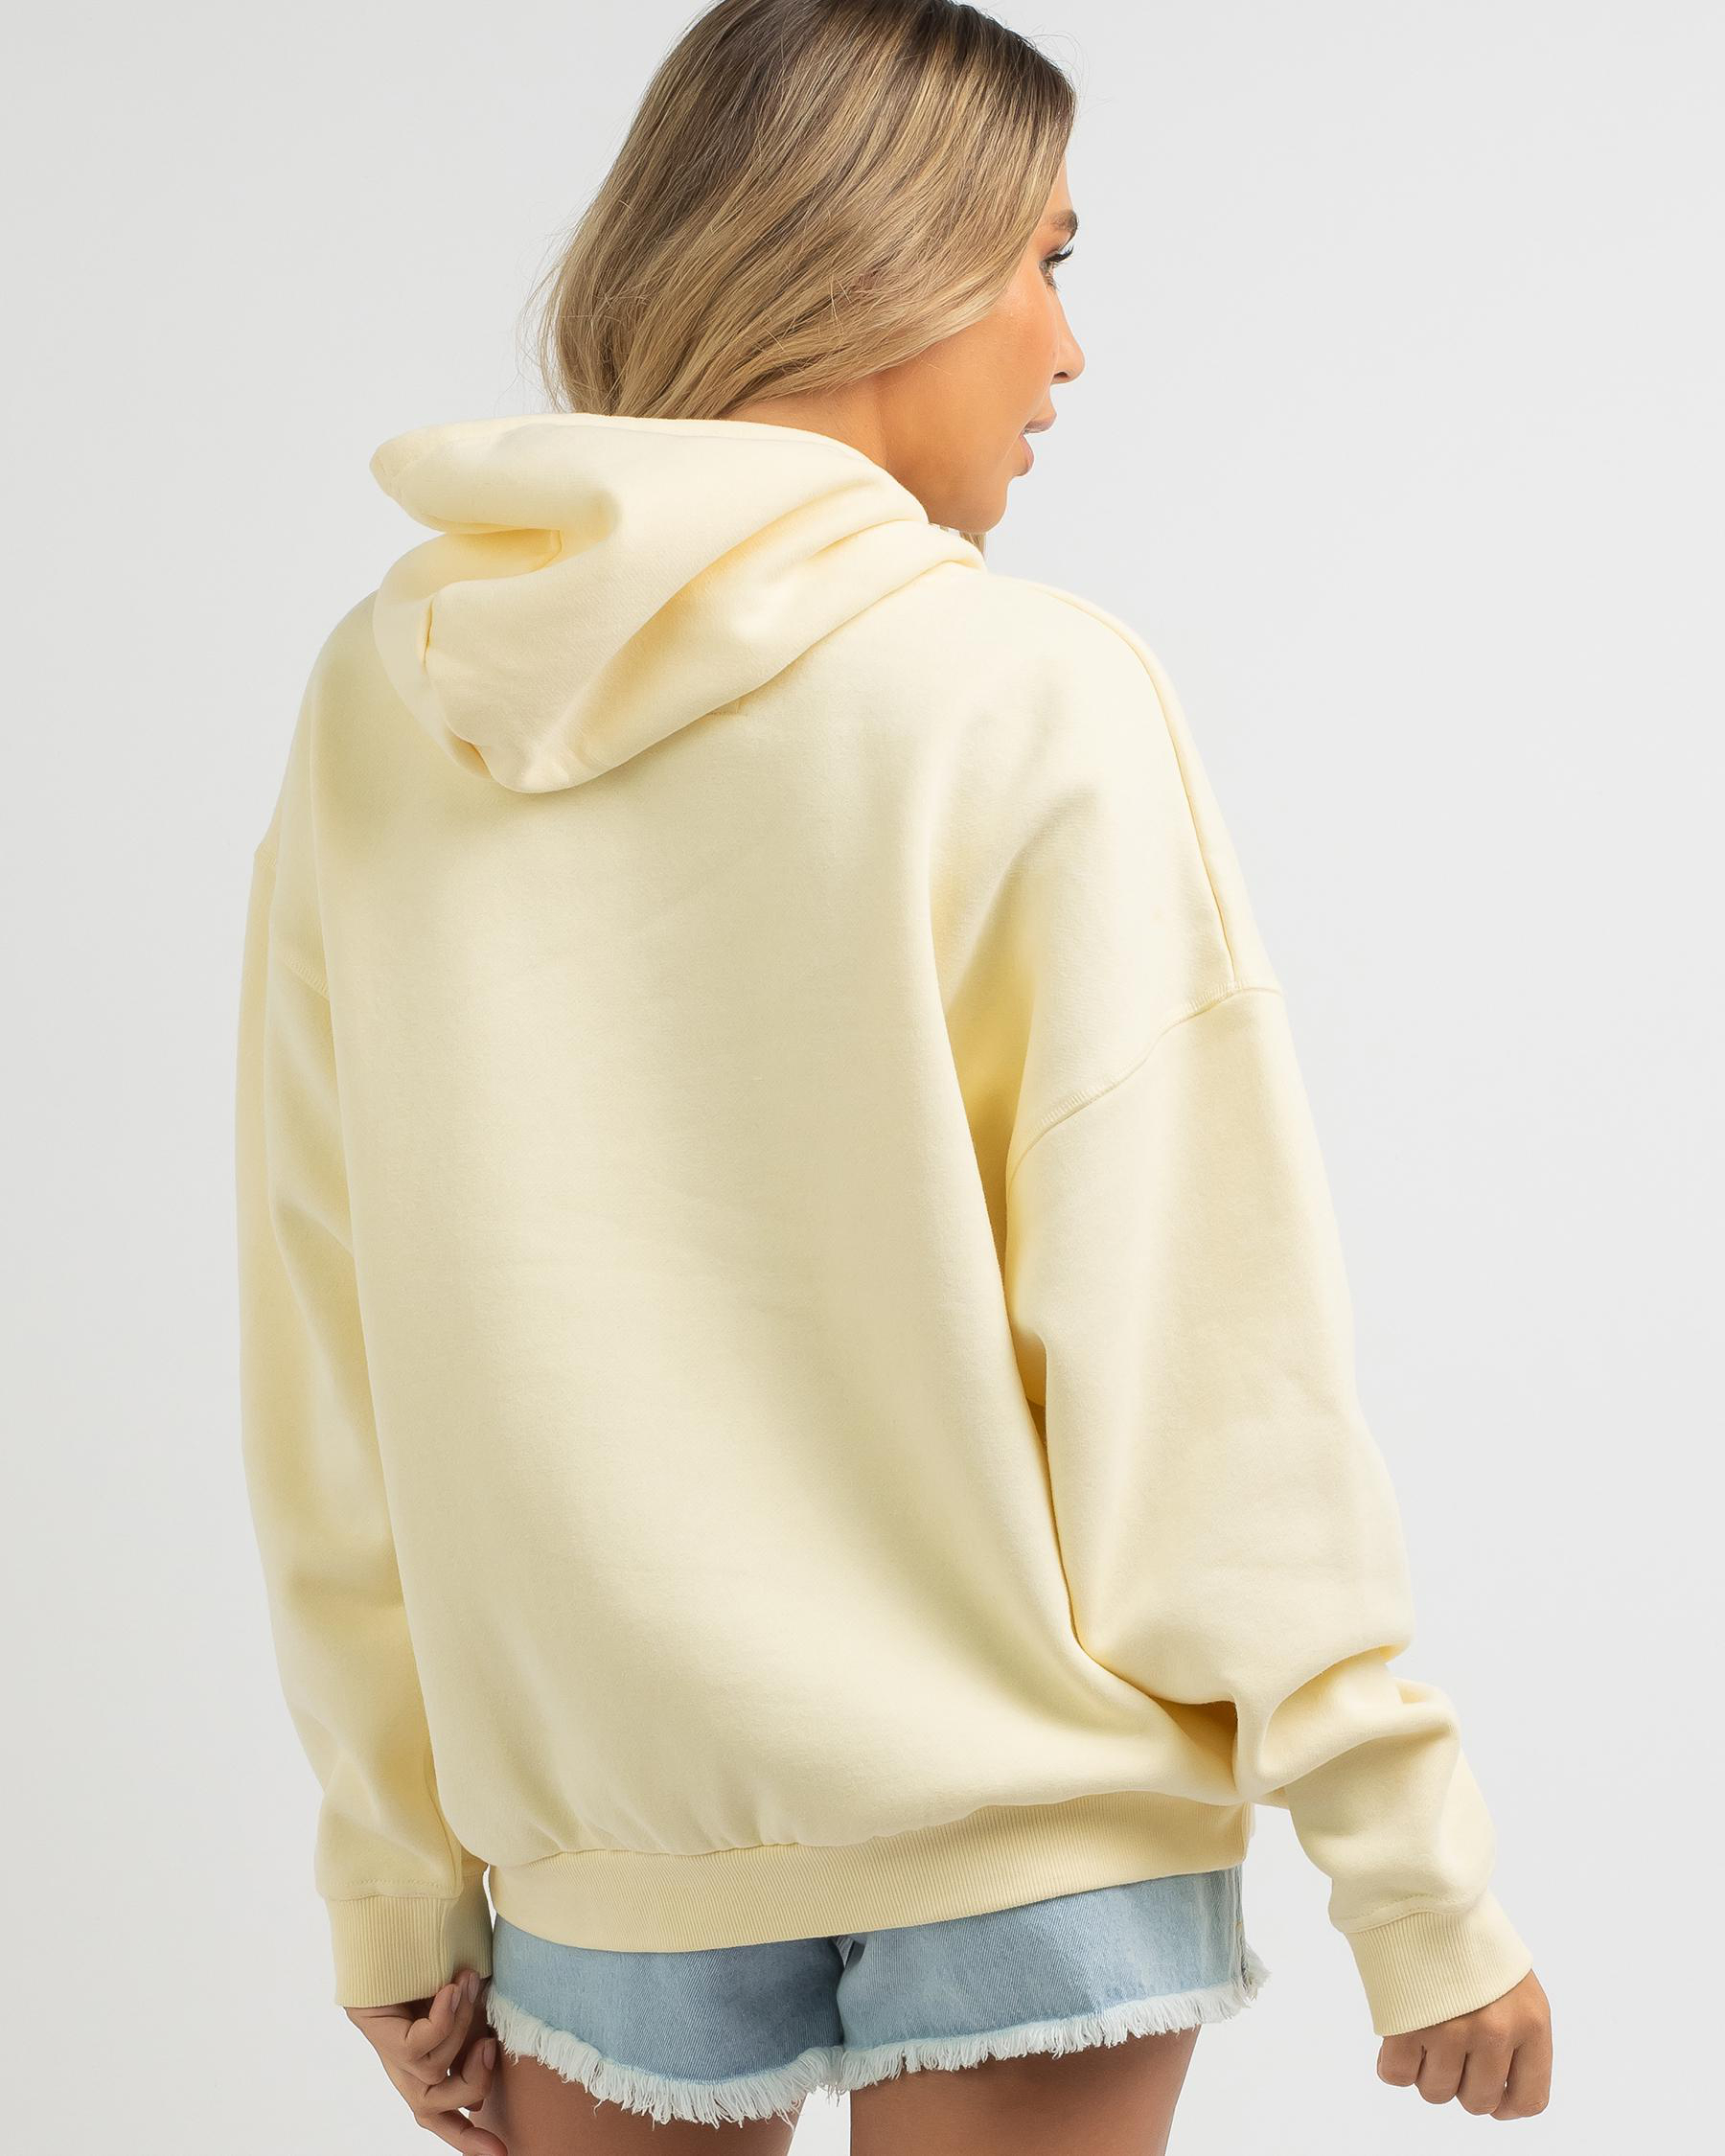 Rip Curl Varsity Hoodie In Pale Yellow - FREE* Shipping & Easy Returns ...